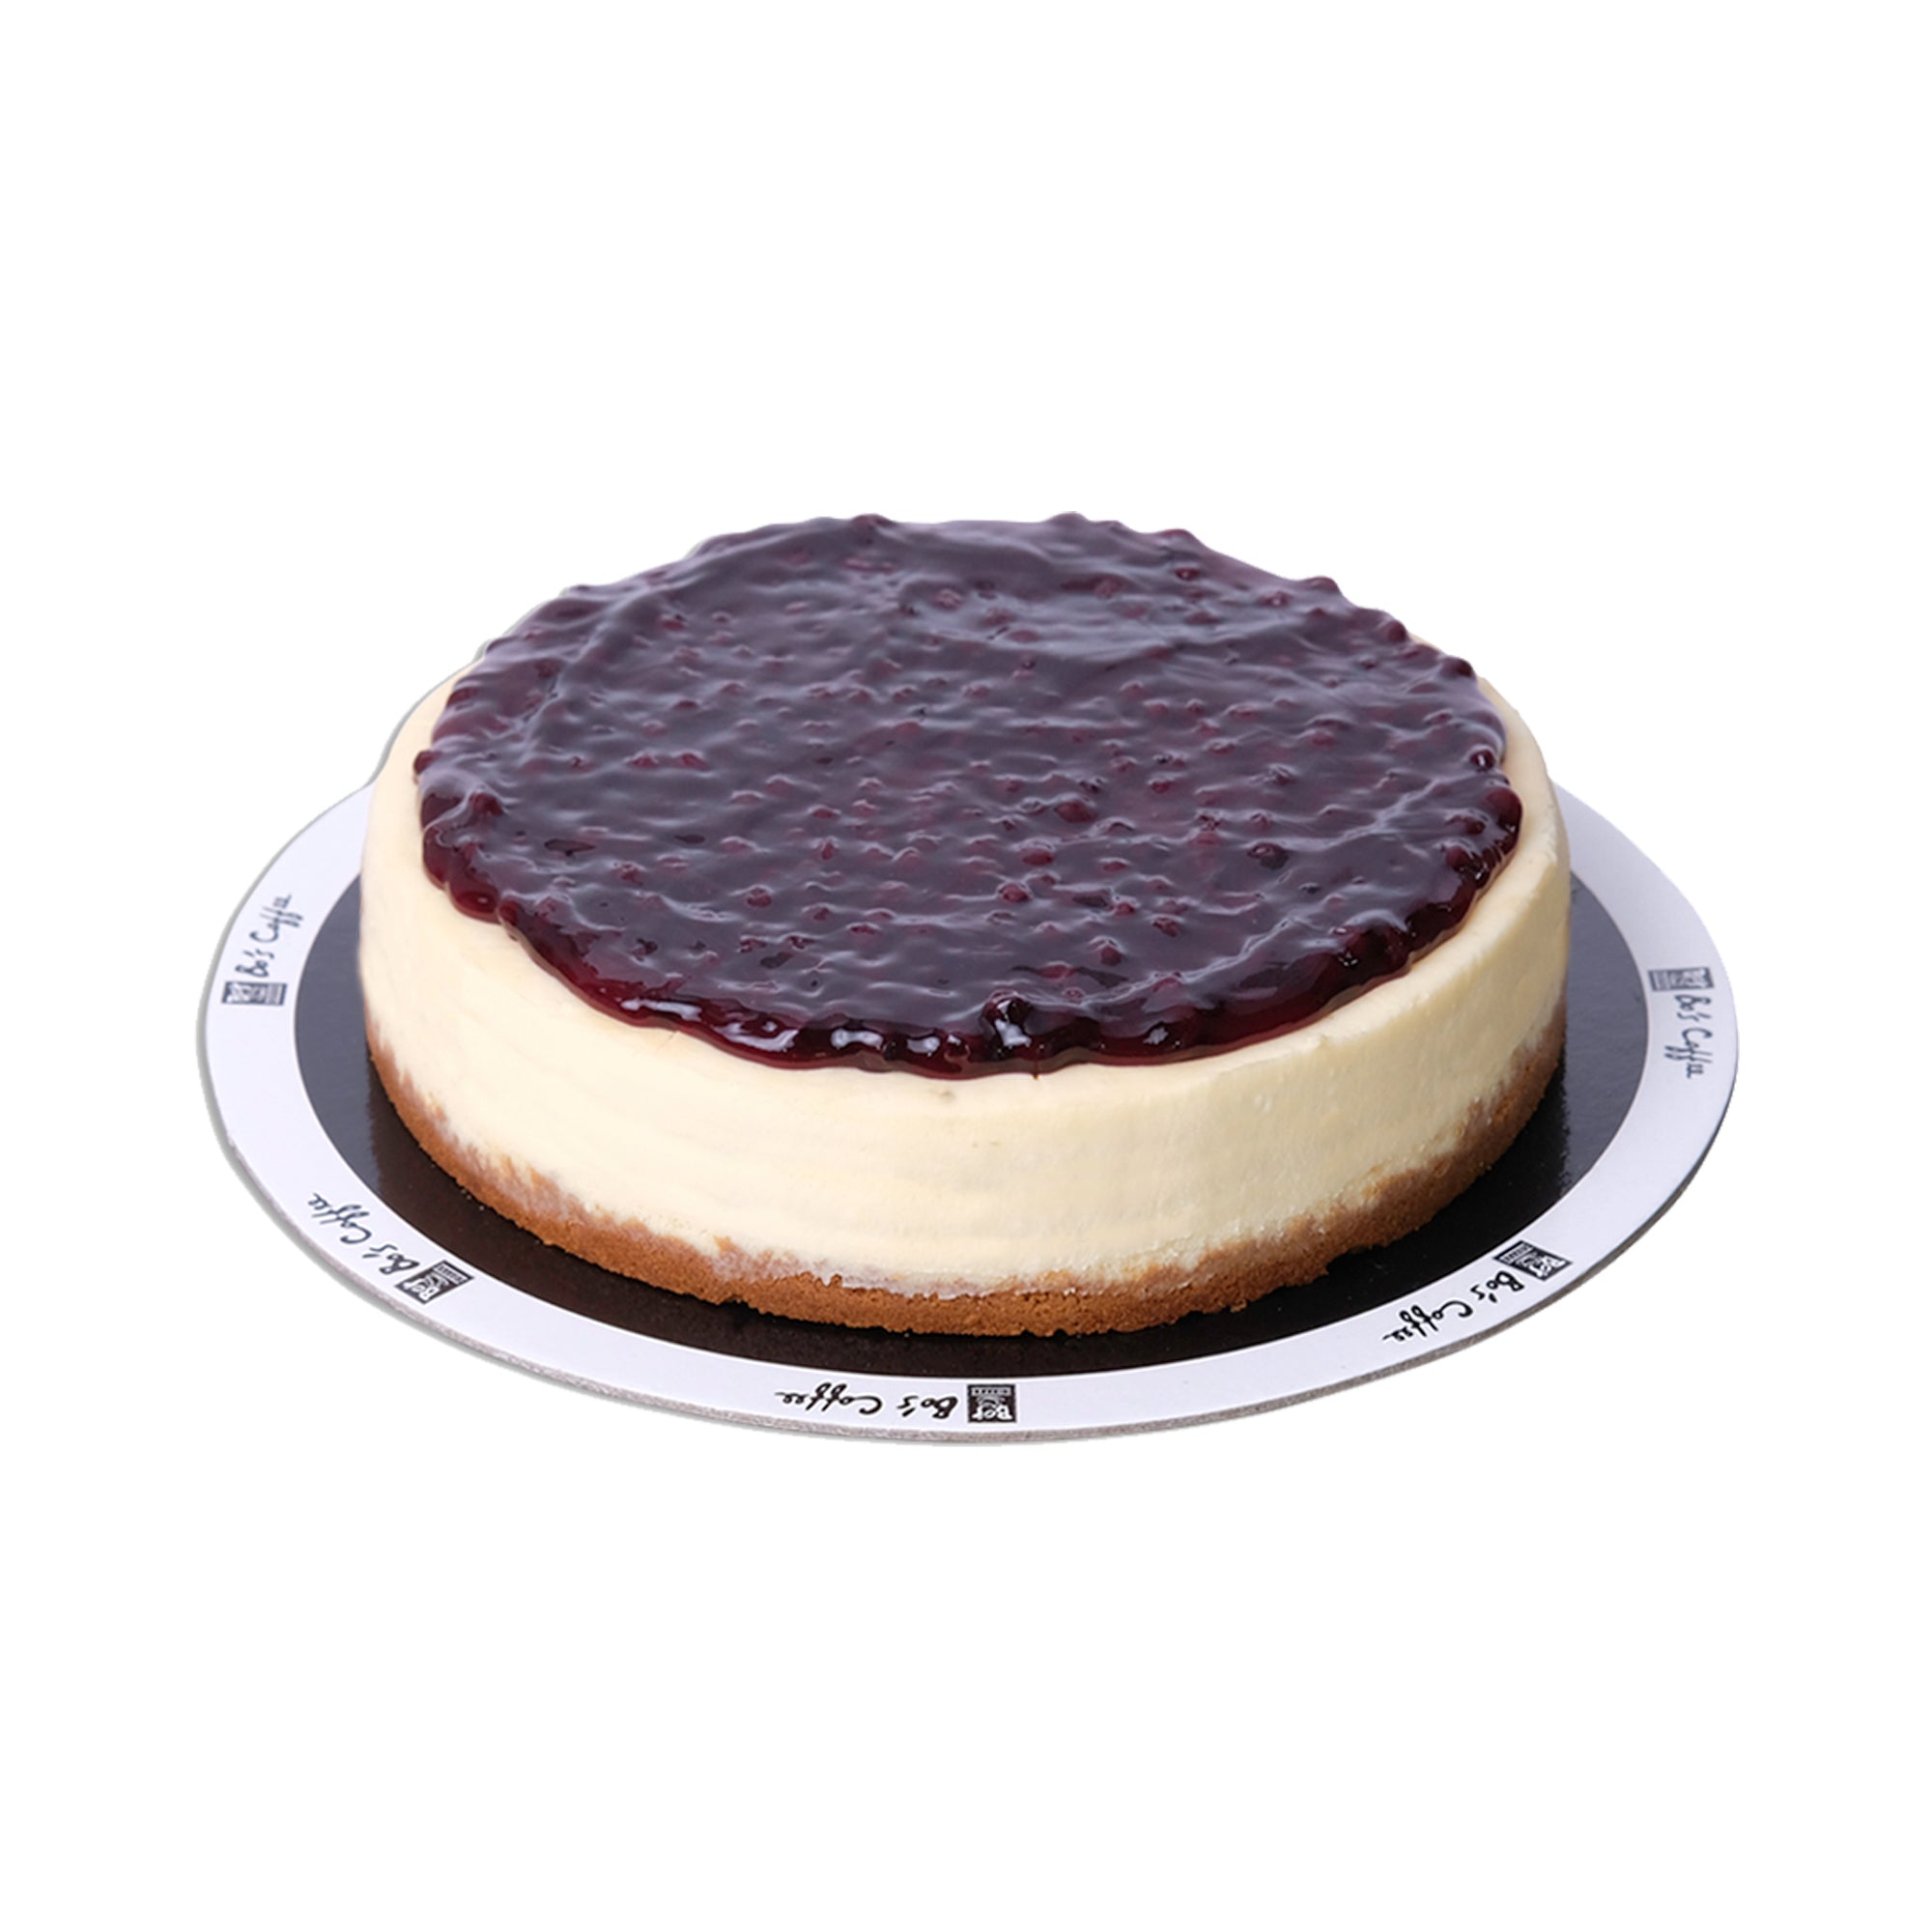 Philippine Coffee Blueberry Cheesecakeon a white background - Bo's Coffee